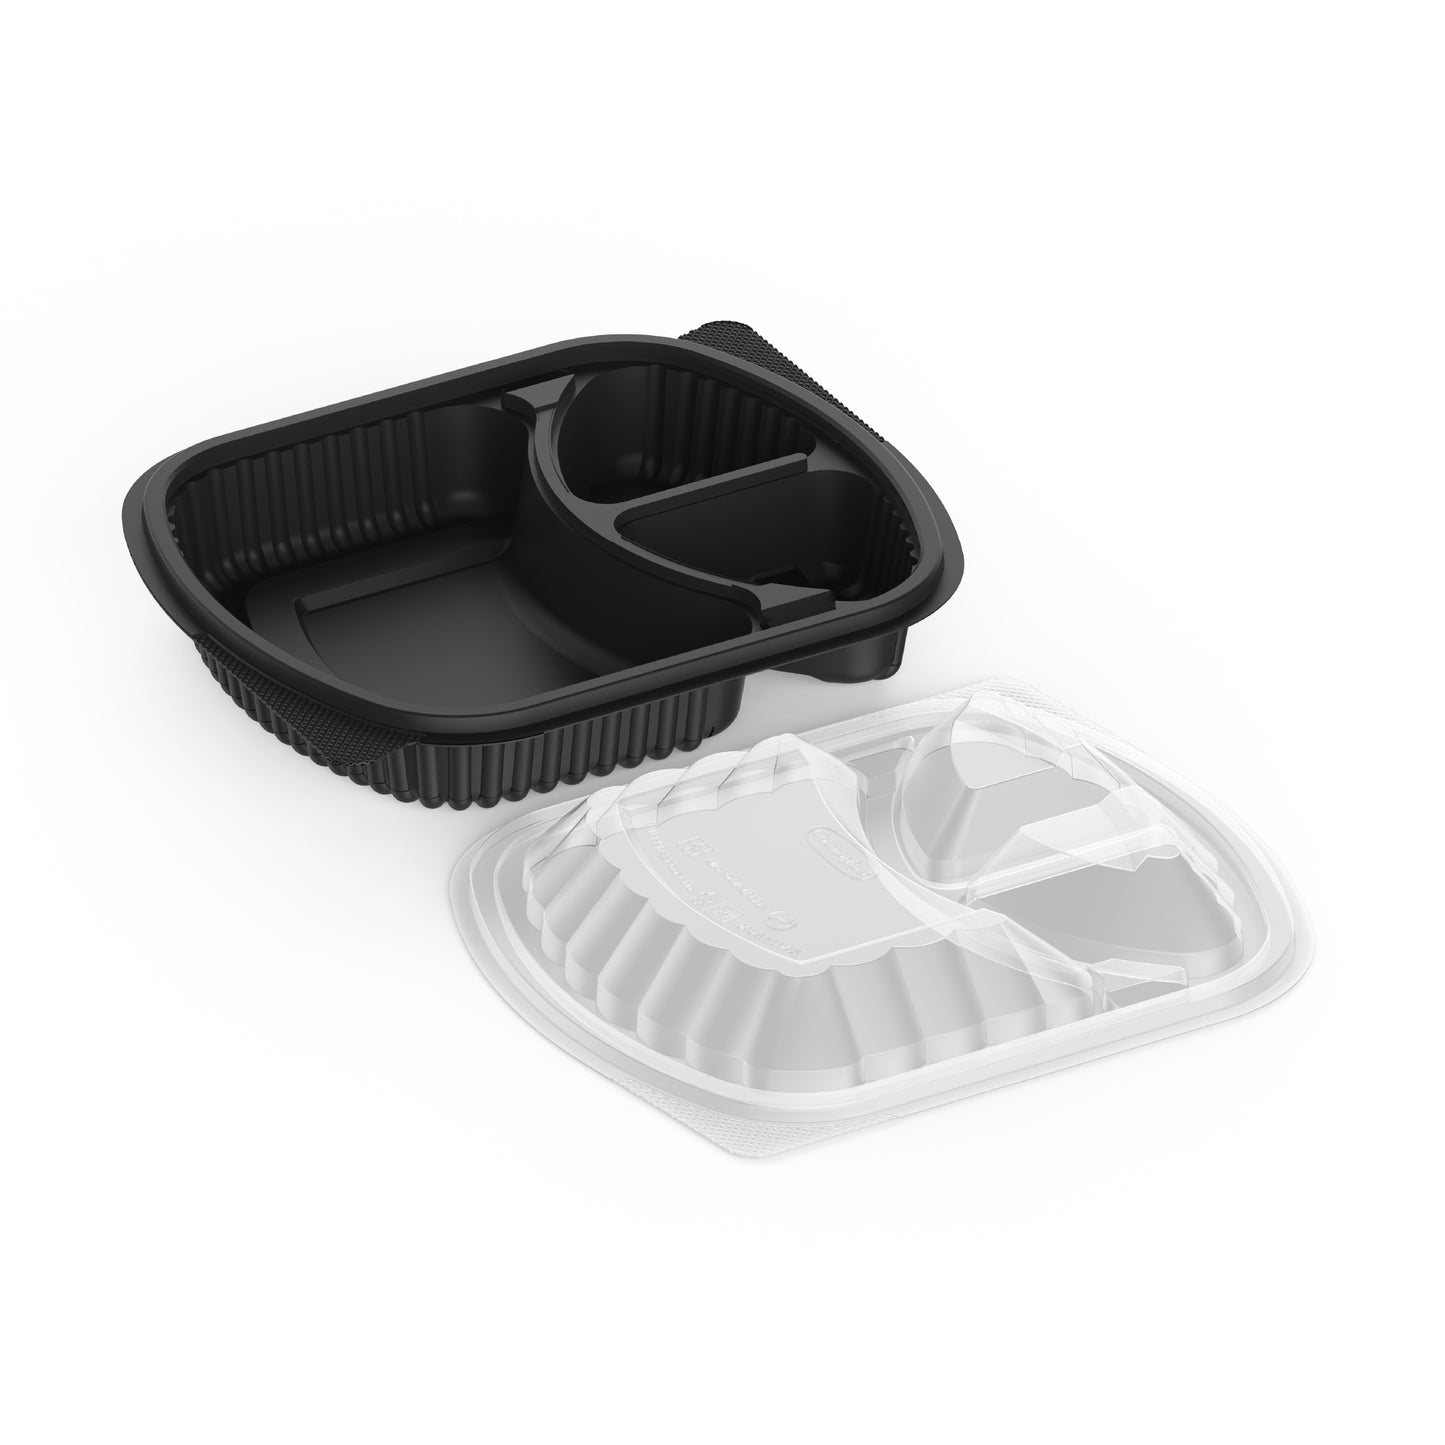 3 Compartments Pack of 10 Black Meal Containers with Clear Lids